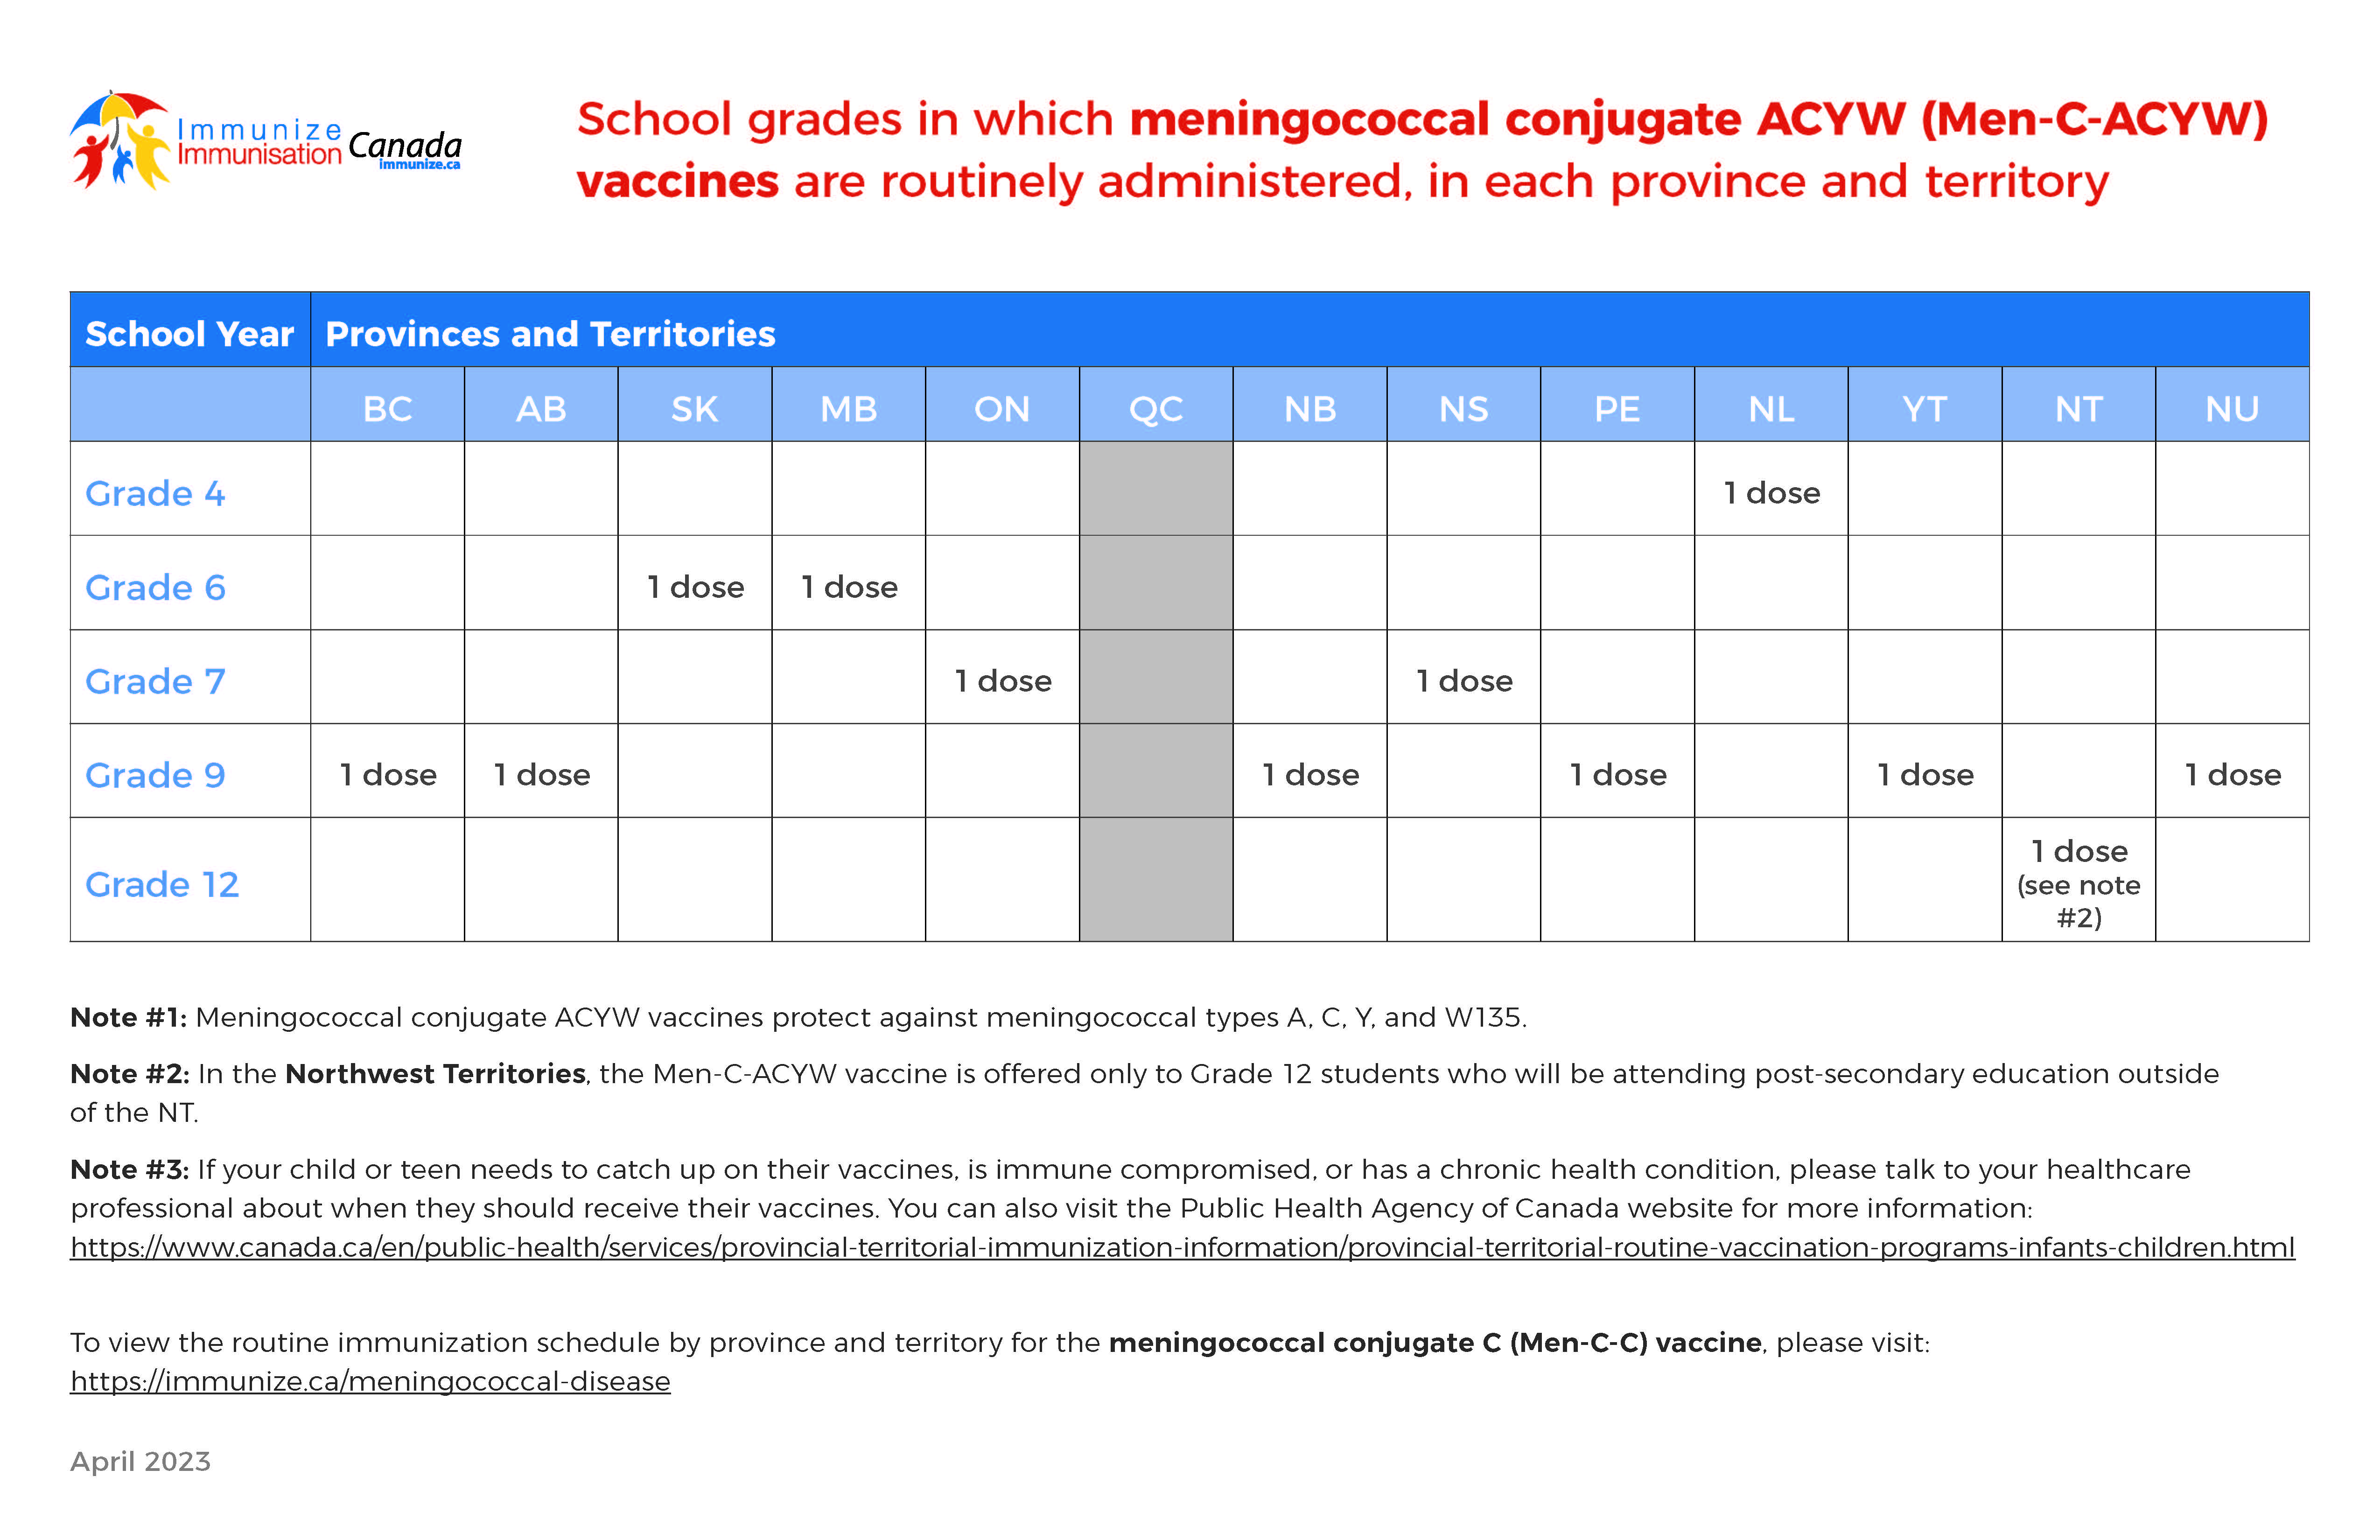 School grades in which meningococcal conjugate ACYW (Men-C-ACYW) vaccines are routinely administered, in each province and territory